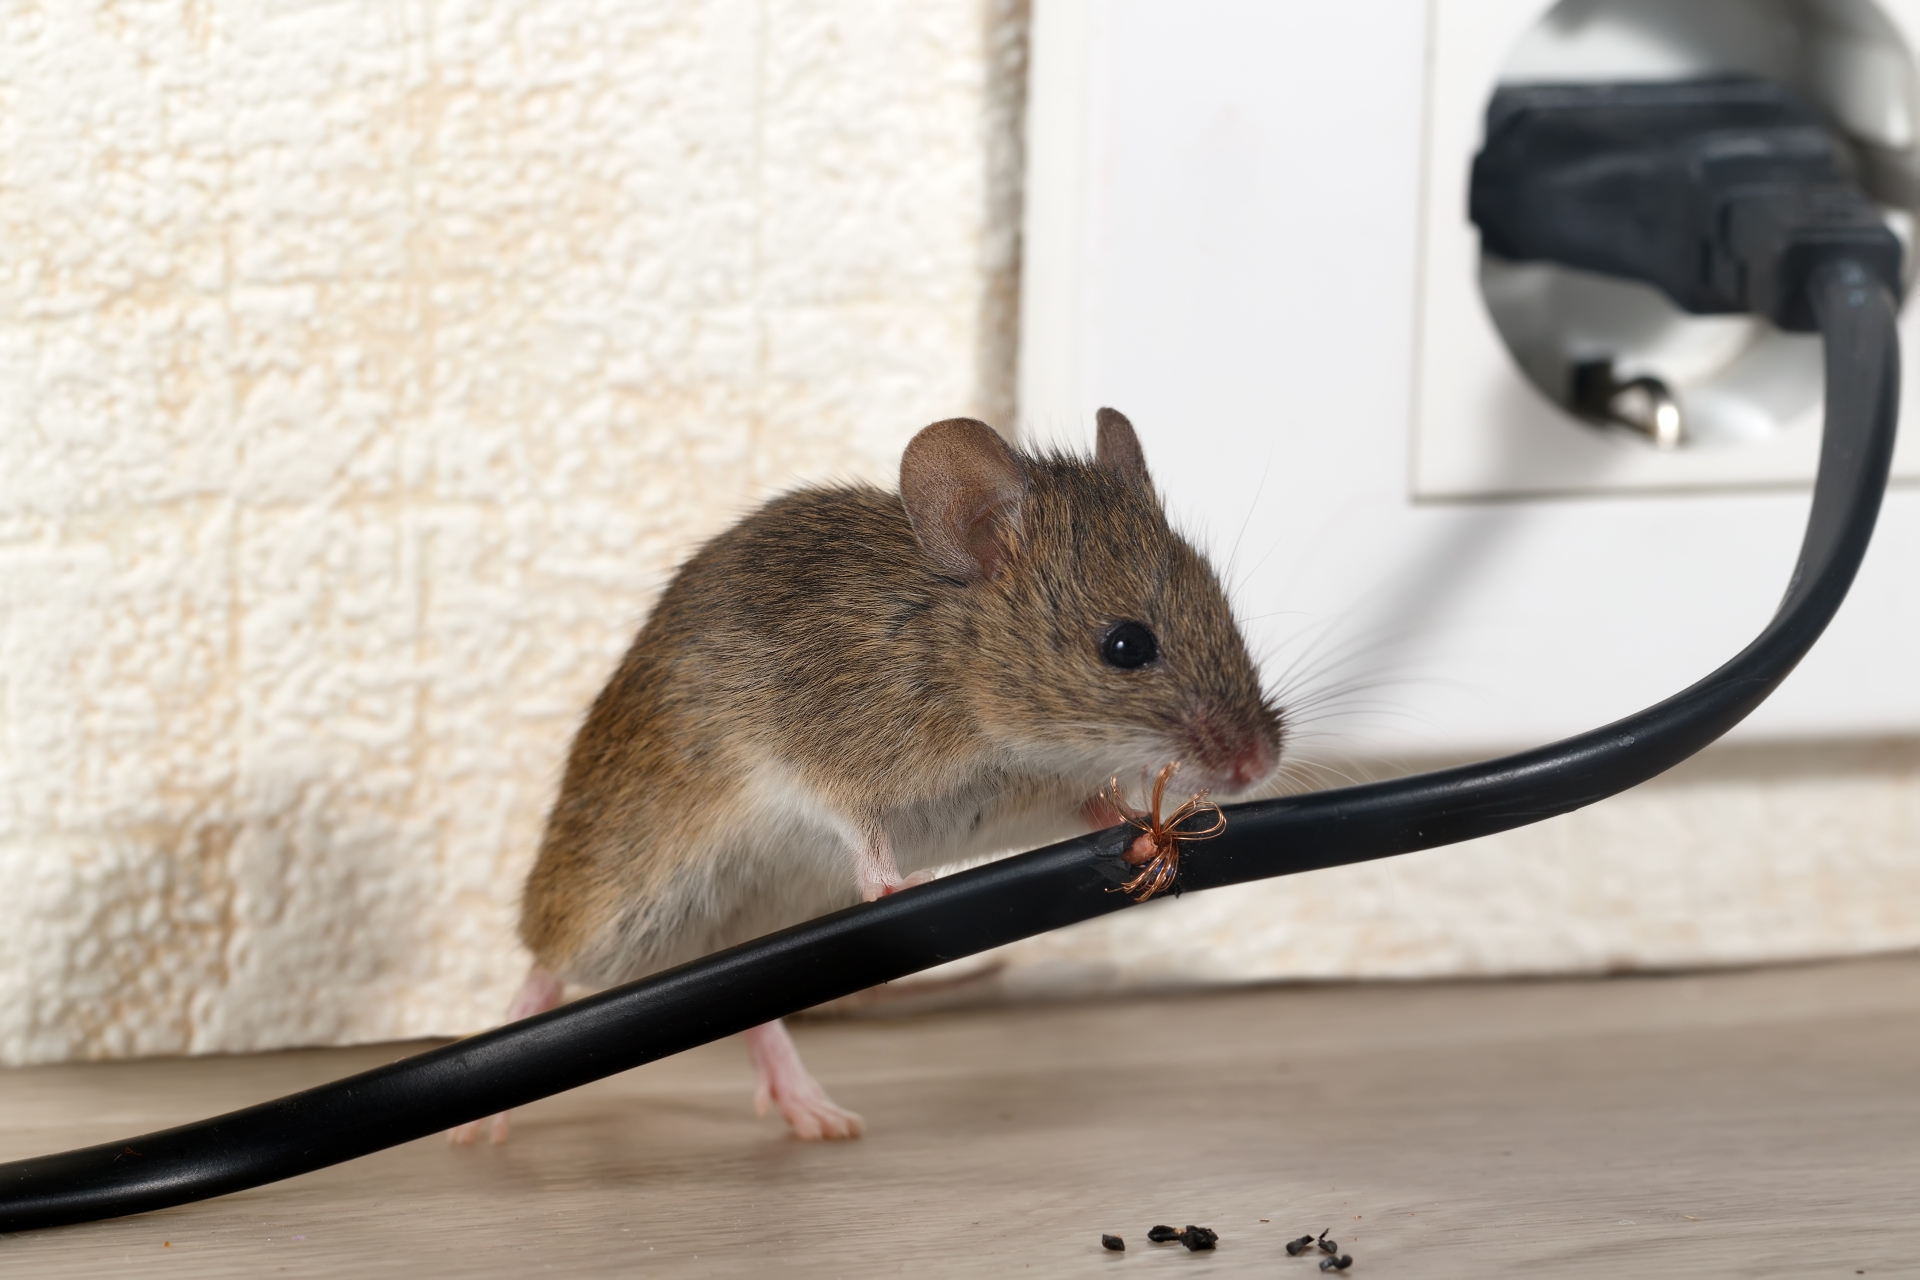 Mice Infestation, Pest Control in Manor Park, E12. Call Now 020 8166 9746